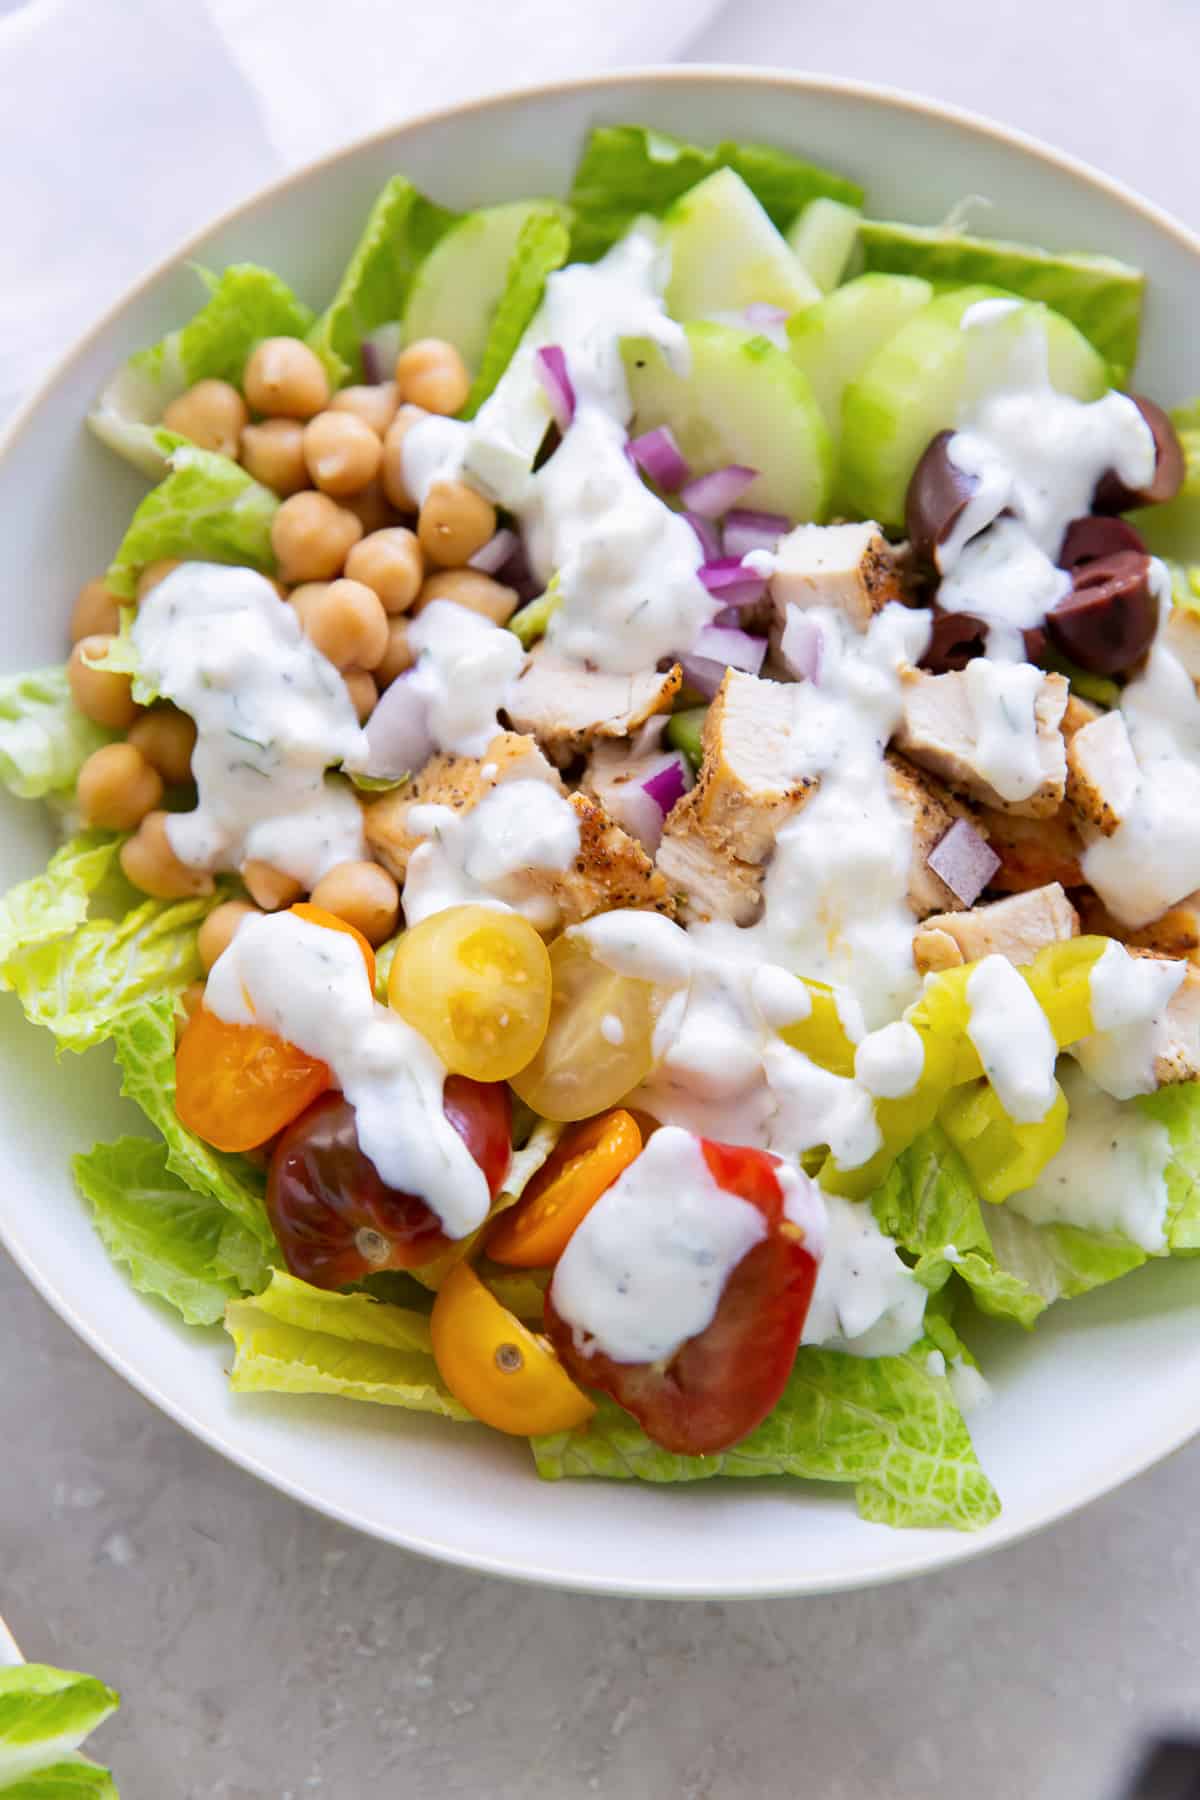 Salad topped with creamy feta dill dressing in a small white salad bowl.